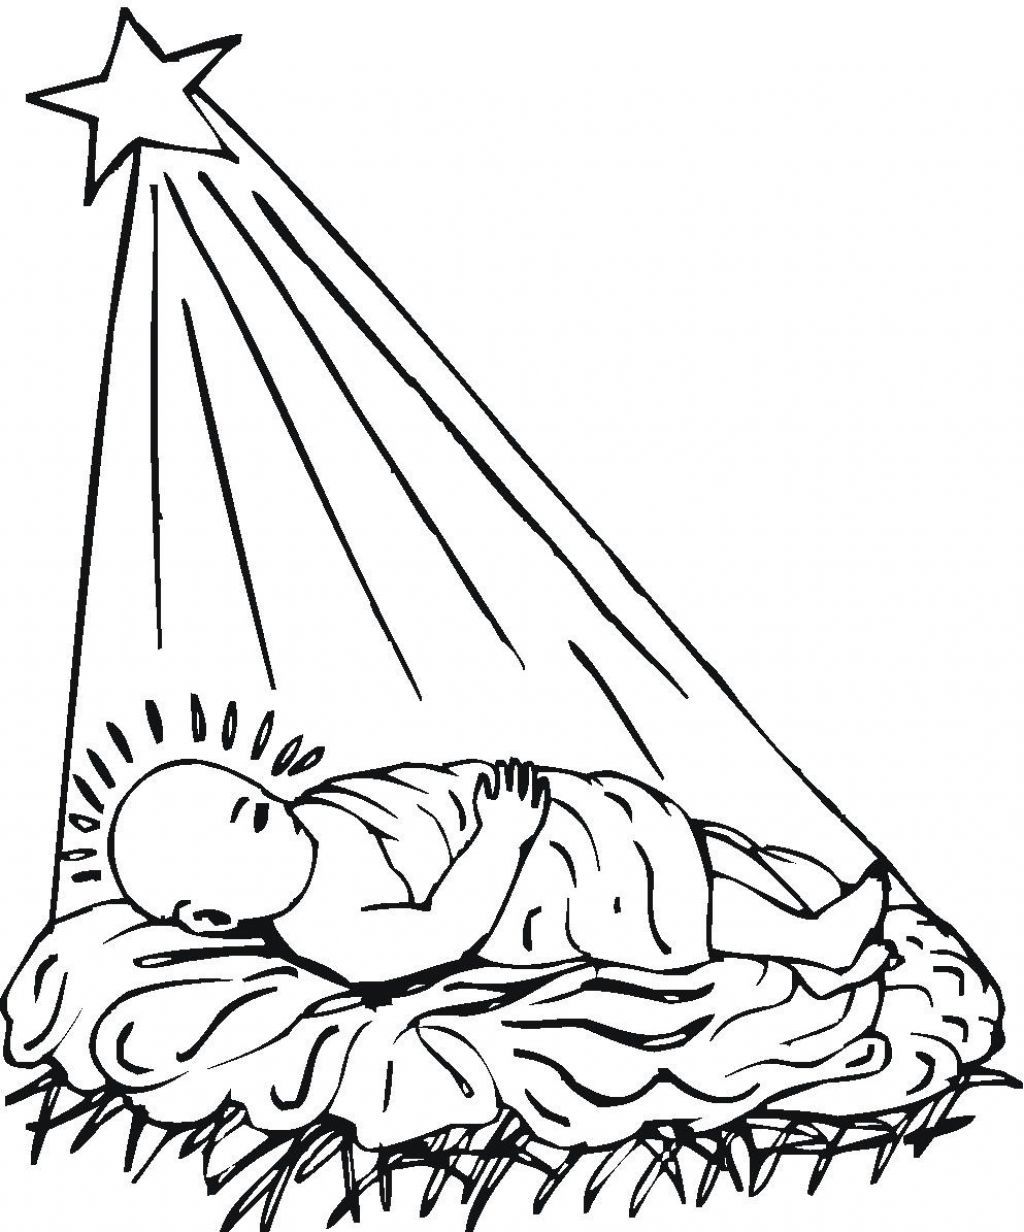 20 Nativity Coloring Pages (Free PDF Printables)